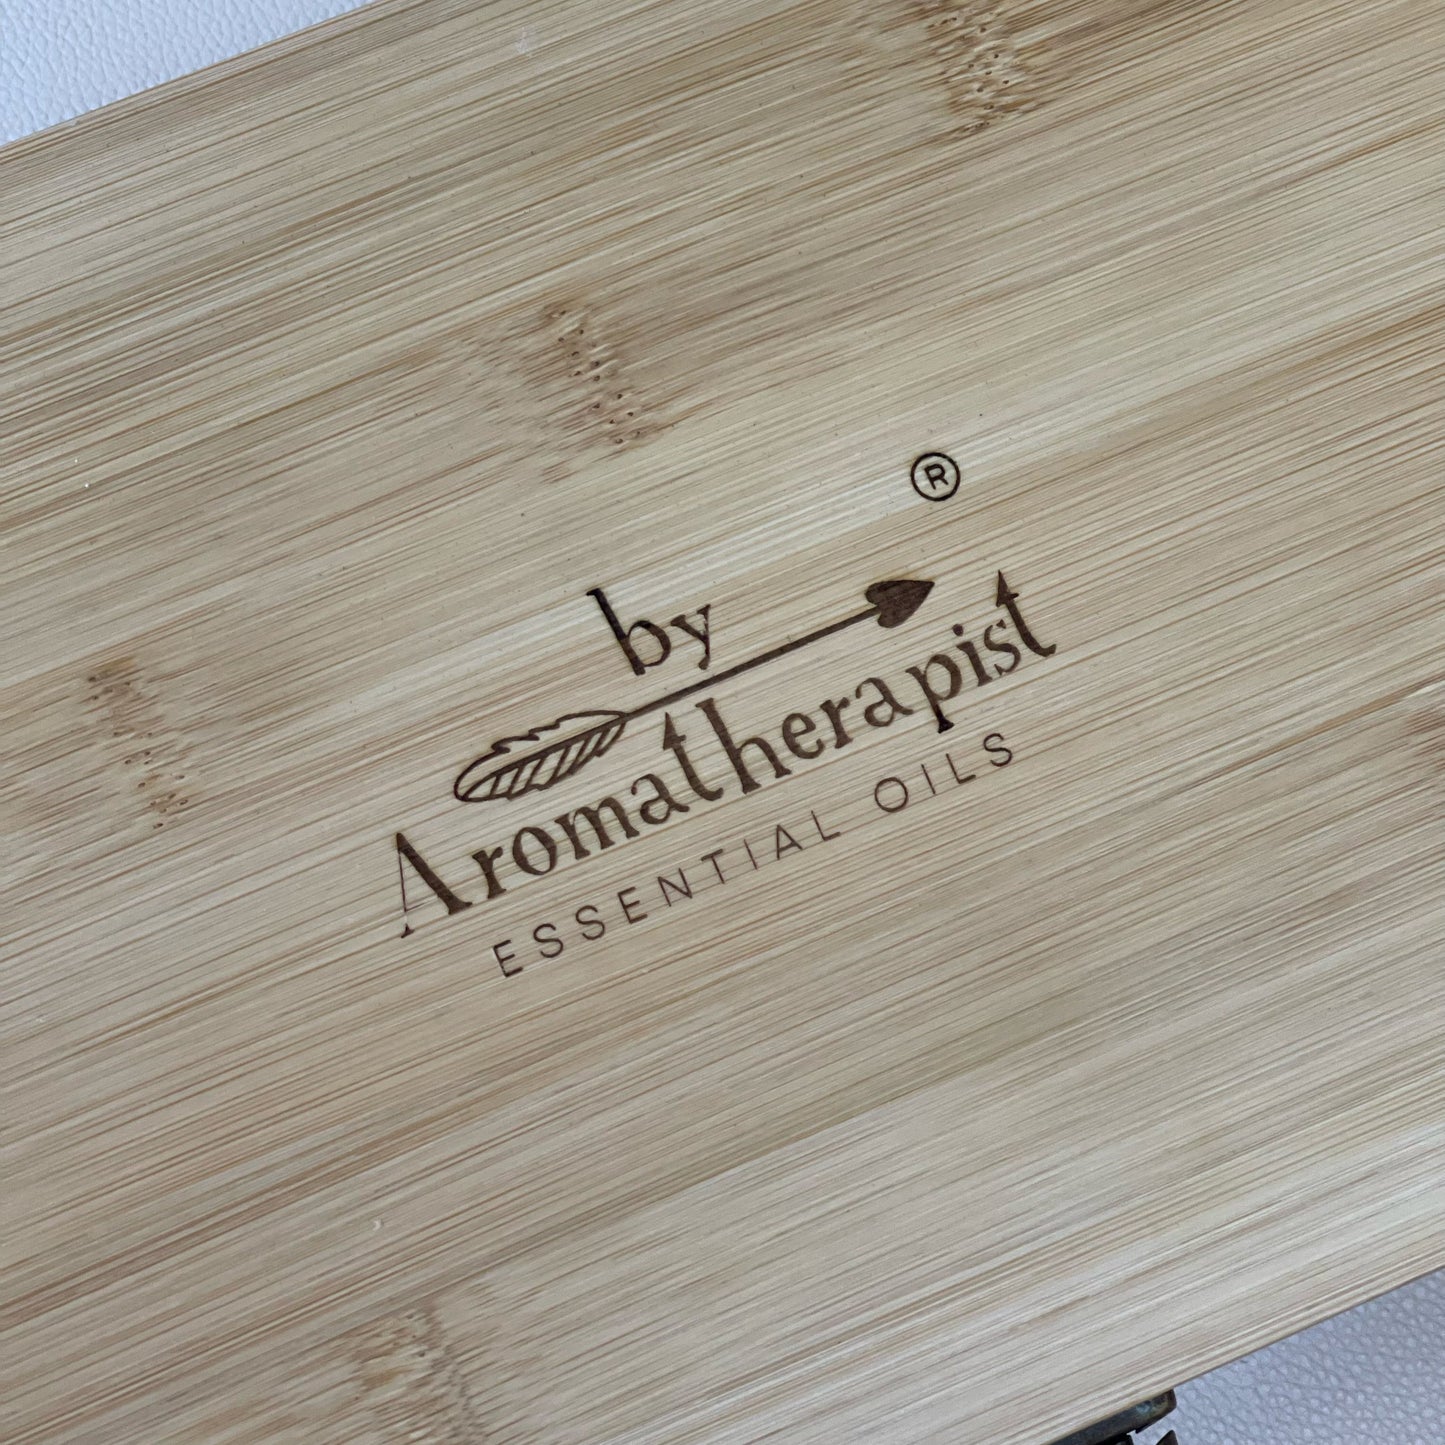 By Aromatherapist Therapeutic Grade Essential Oils Package 治療級精油套裝